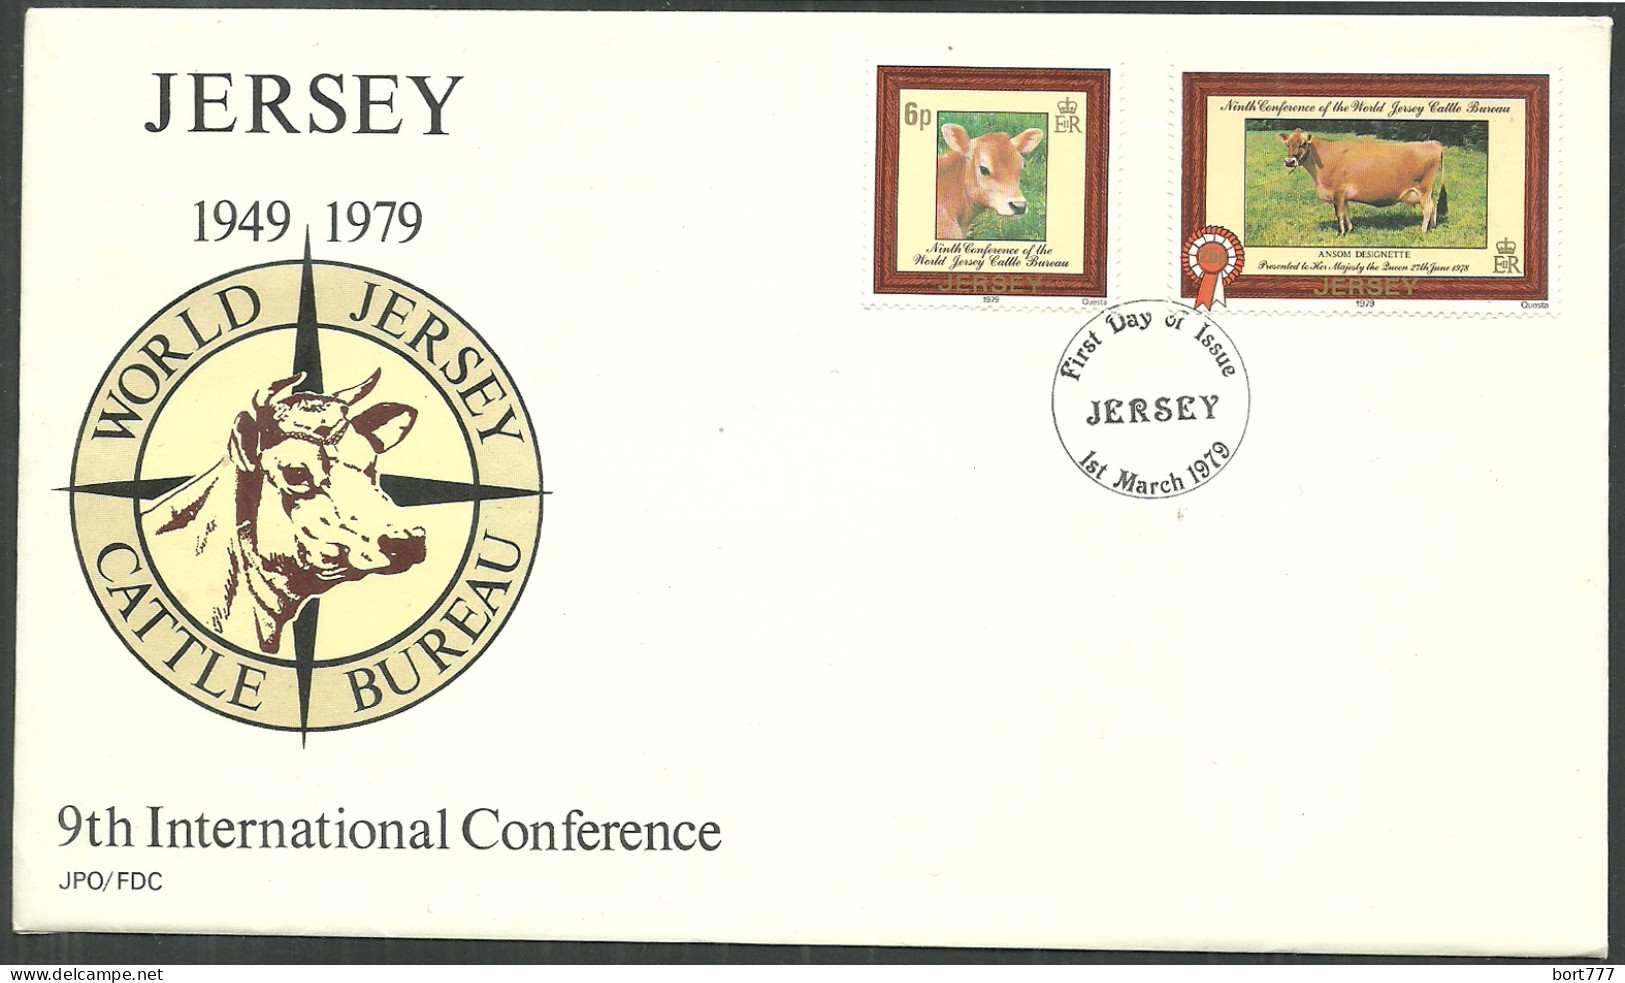 JERSEY 1979 FDC COVER - Animals - Jersey